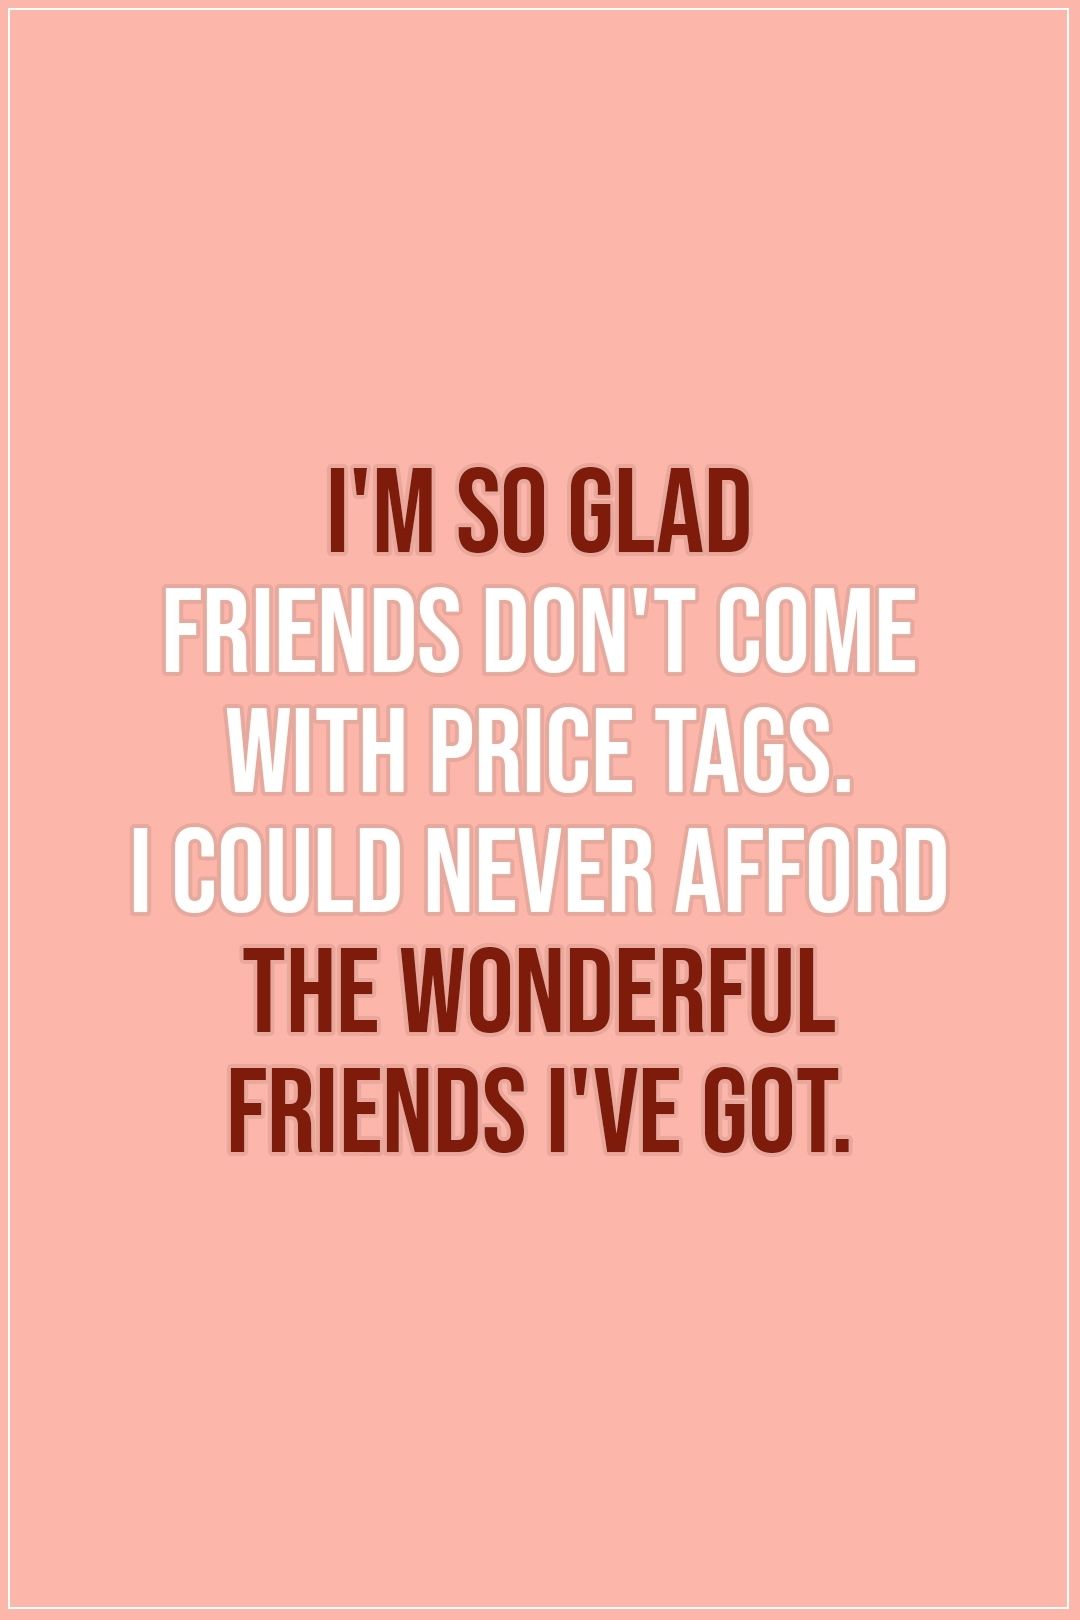 Friendship quotes _ I'm so glad friends don't come with price tags_ I could never afford the wonderful friends I've got. - Unknown _ #Friendship #Friends #Friend #FriendshipQuotes